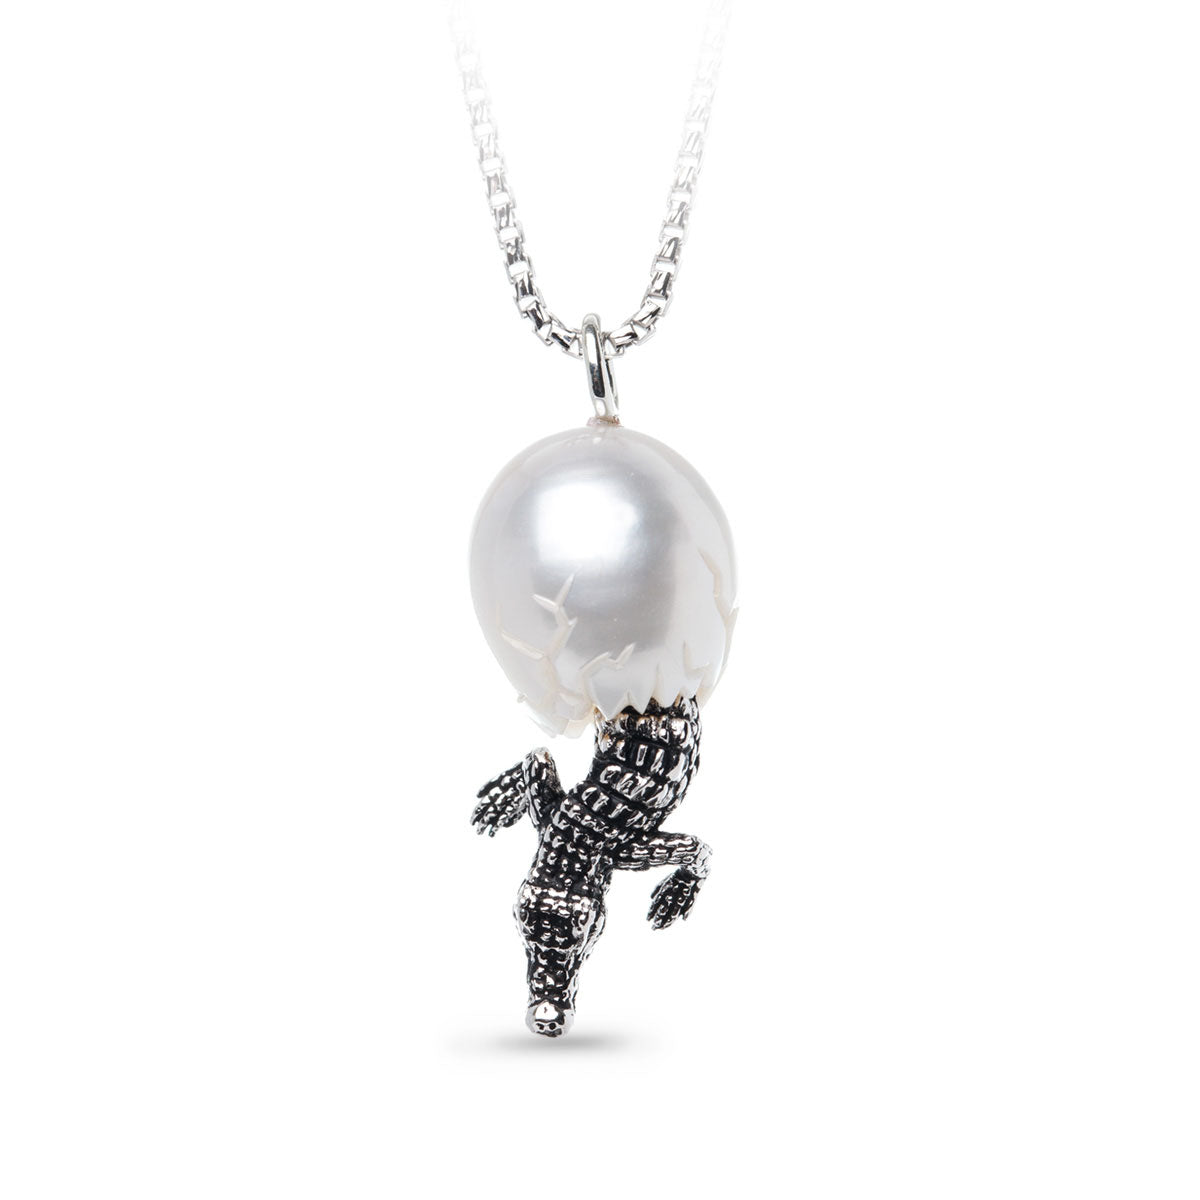 Galatea Alligator Carved White Pearl Egg Necklace